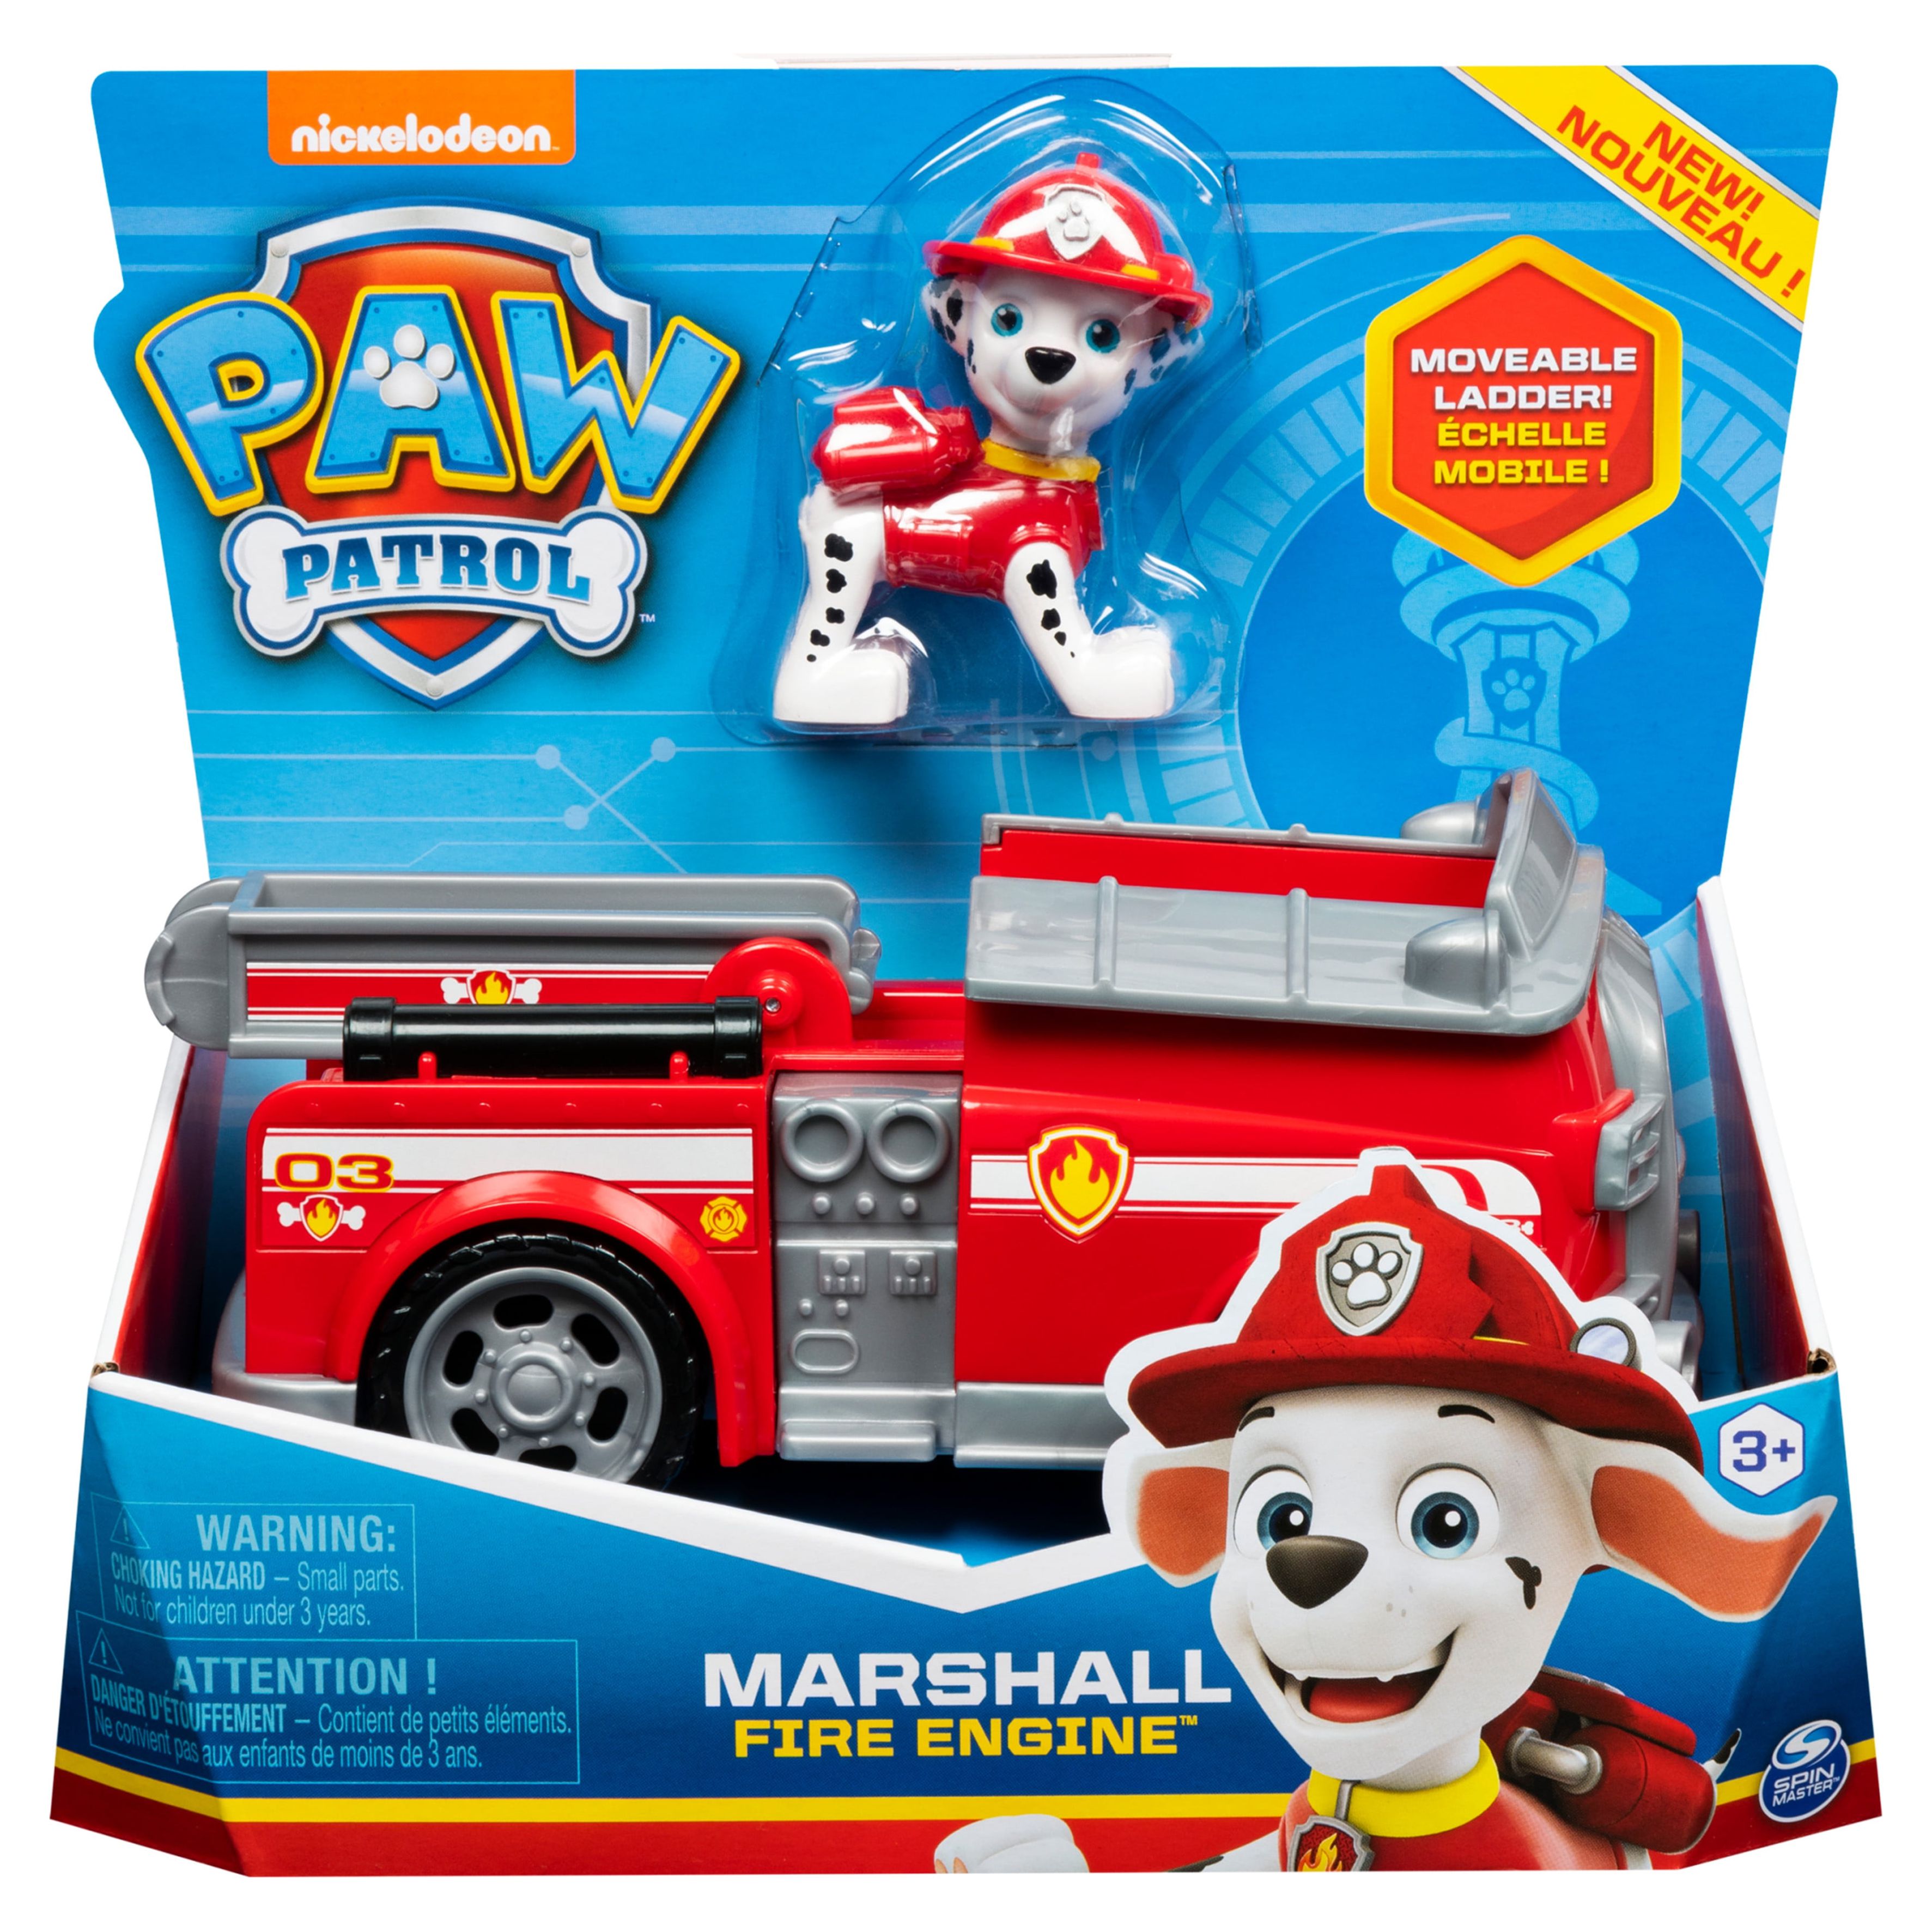 PAW Patrol, Marshall’s Fire Engine Vehicle with Collectible Figure - image 2 of 5